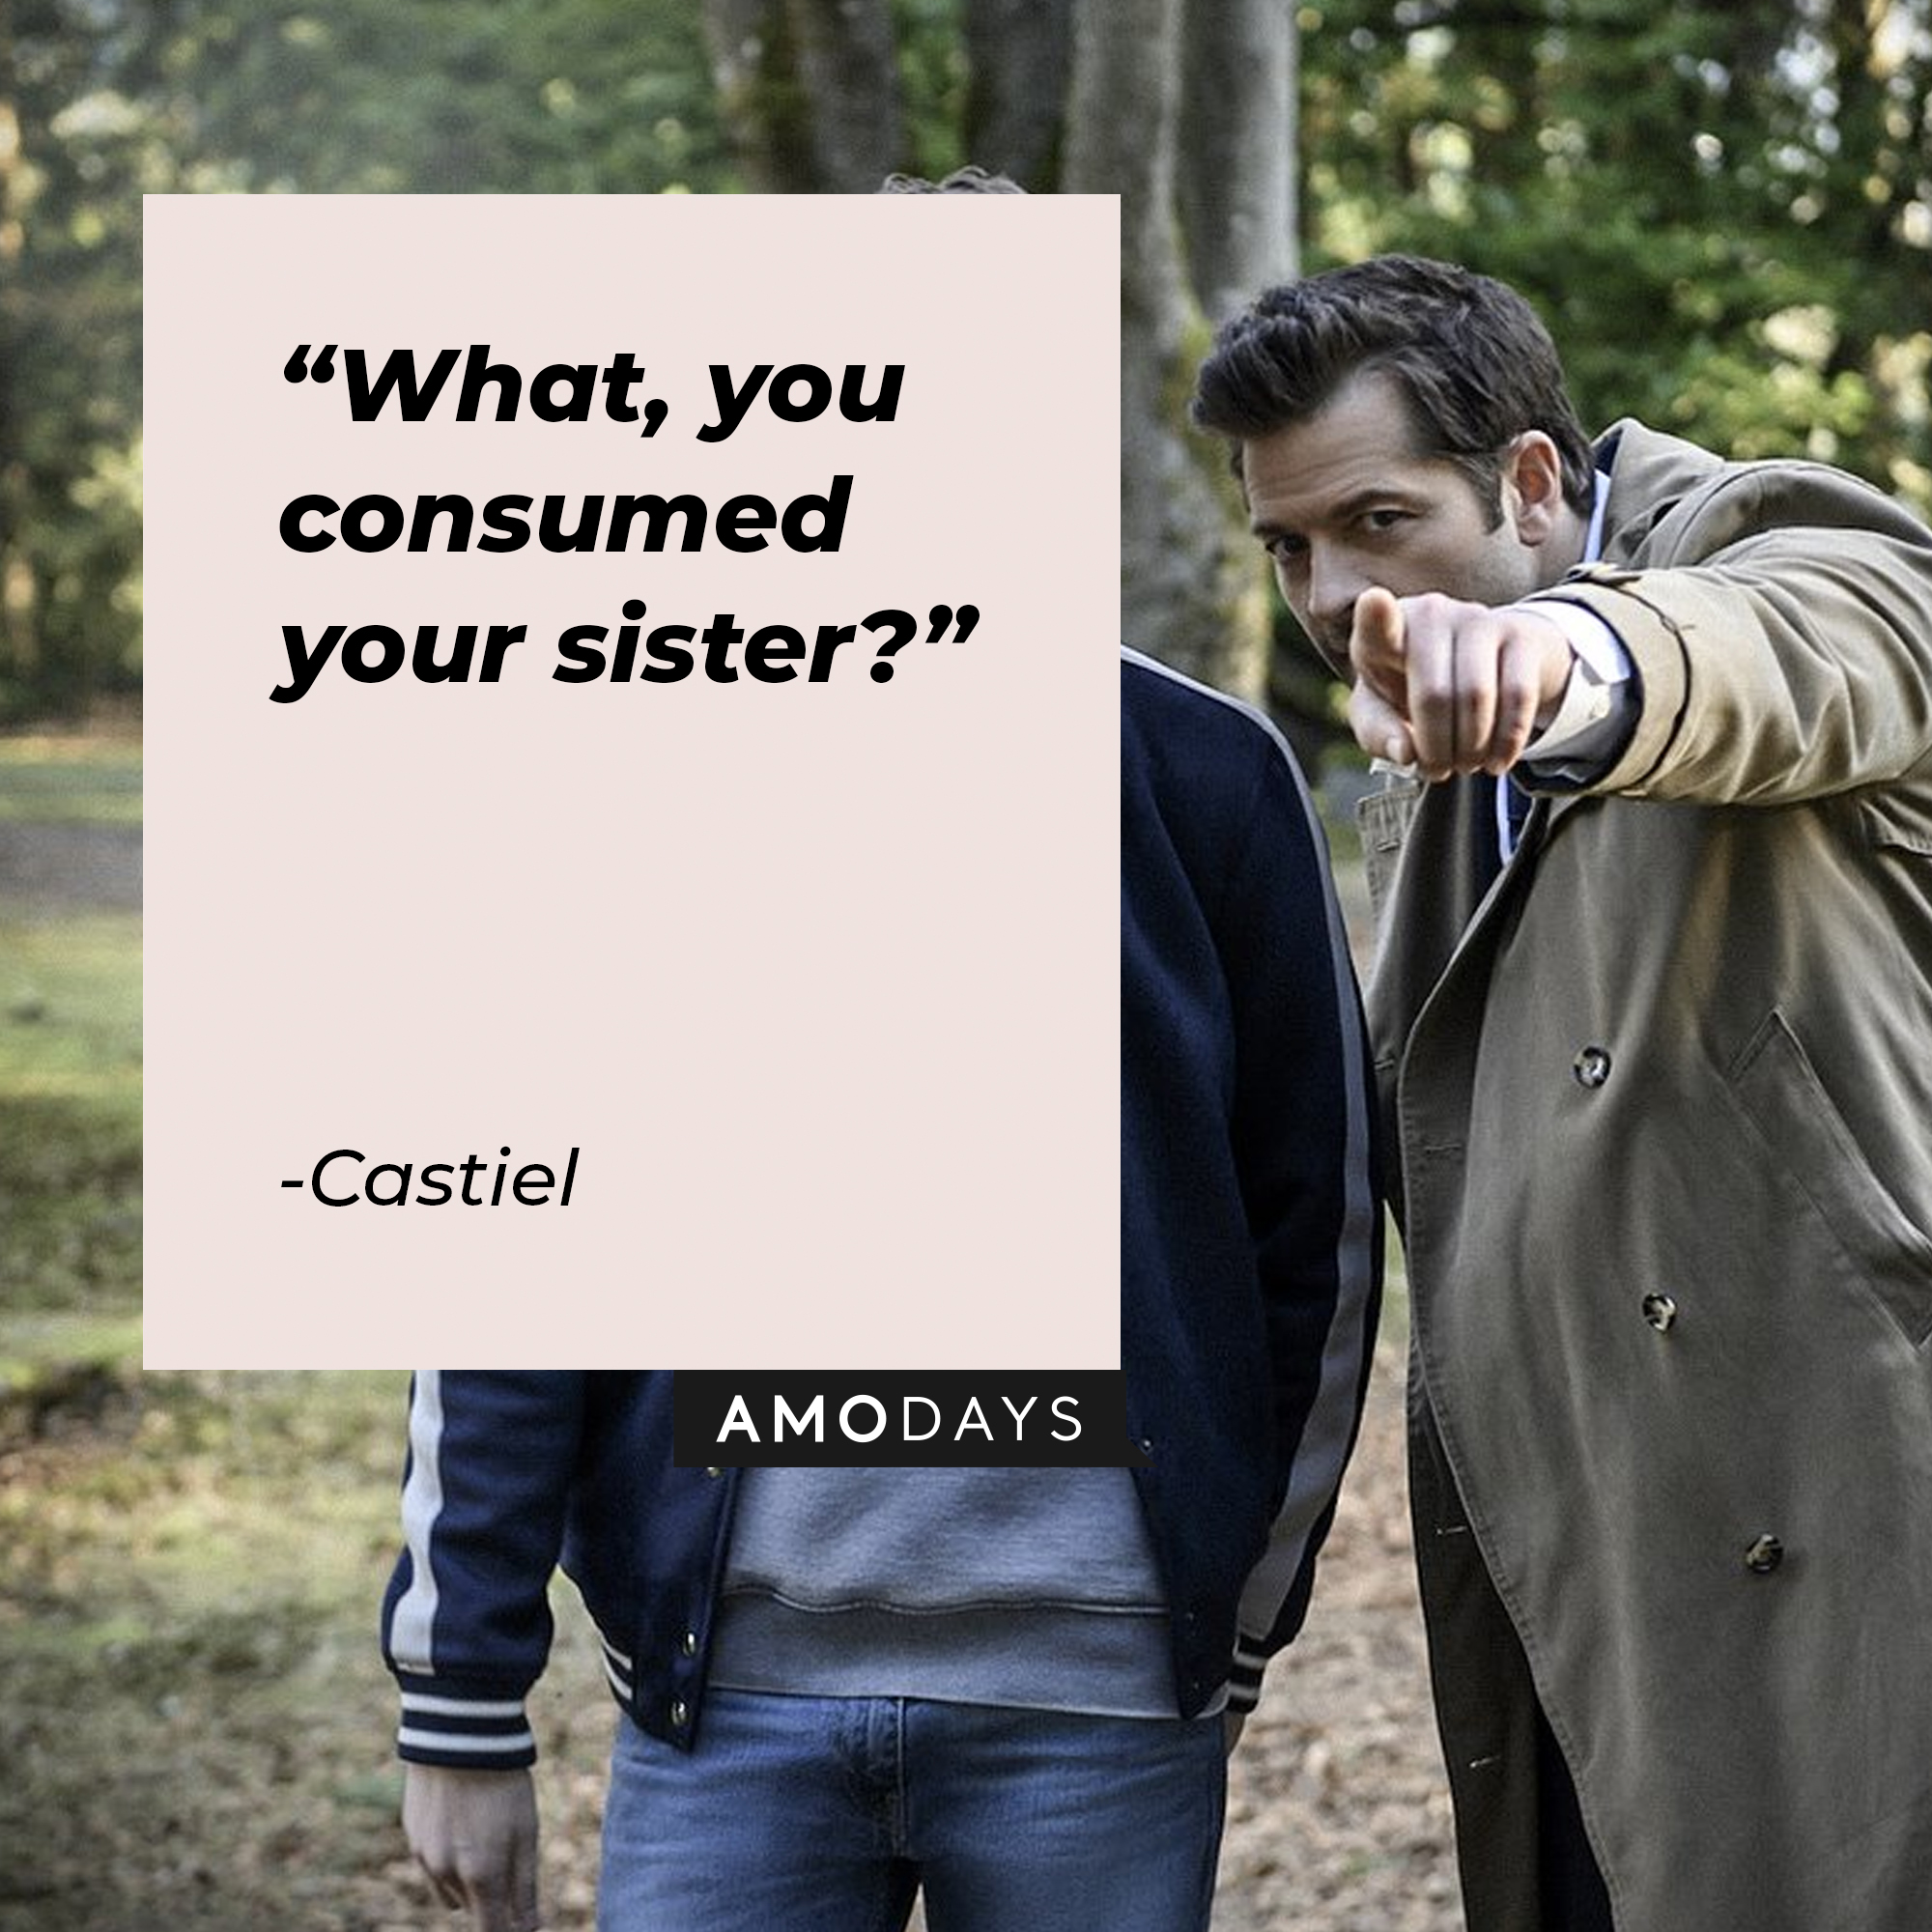 An image of Castiel with his quote: “What, you consumed your sister?” |Source: facebook.com/Supernatural